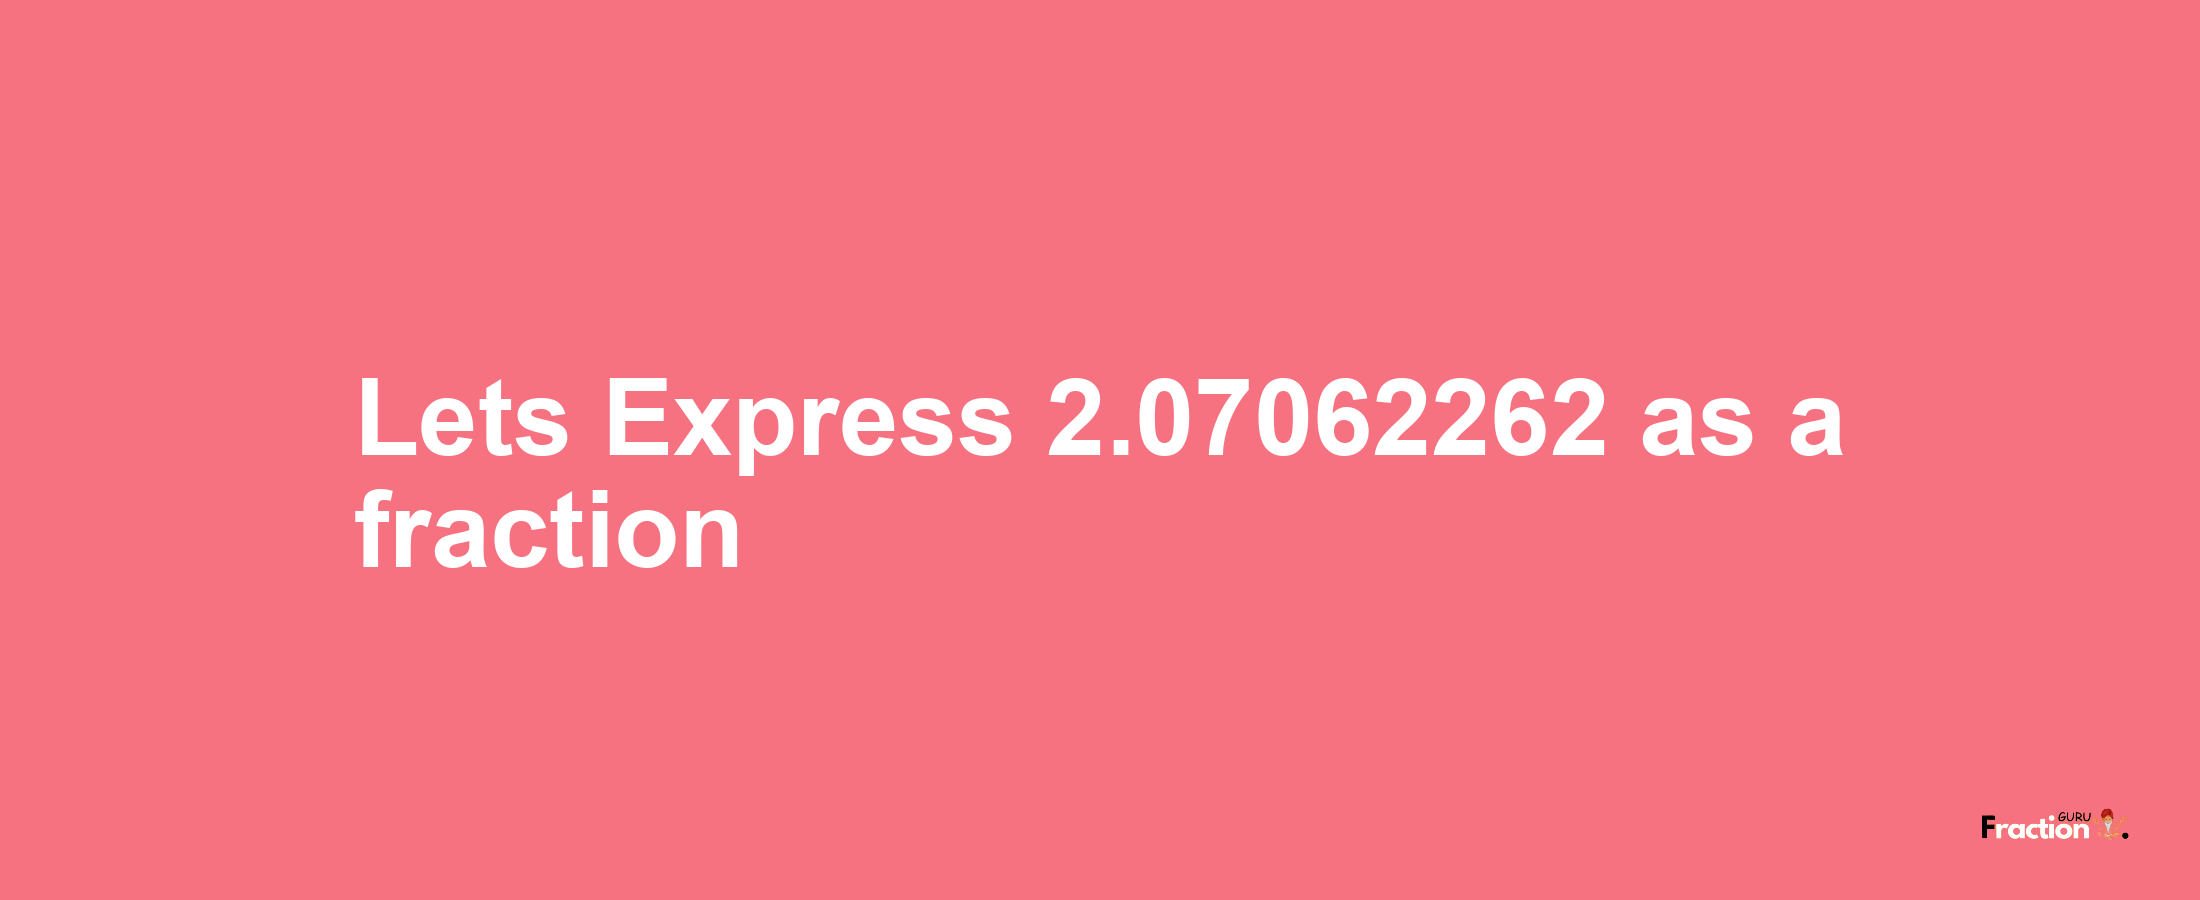 Lets Express 2.07062262 as afraction